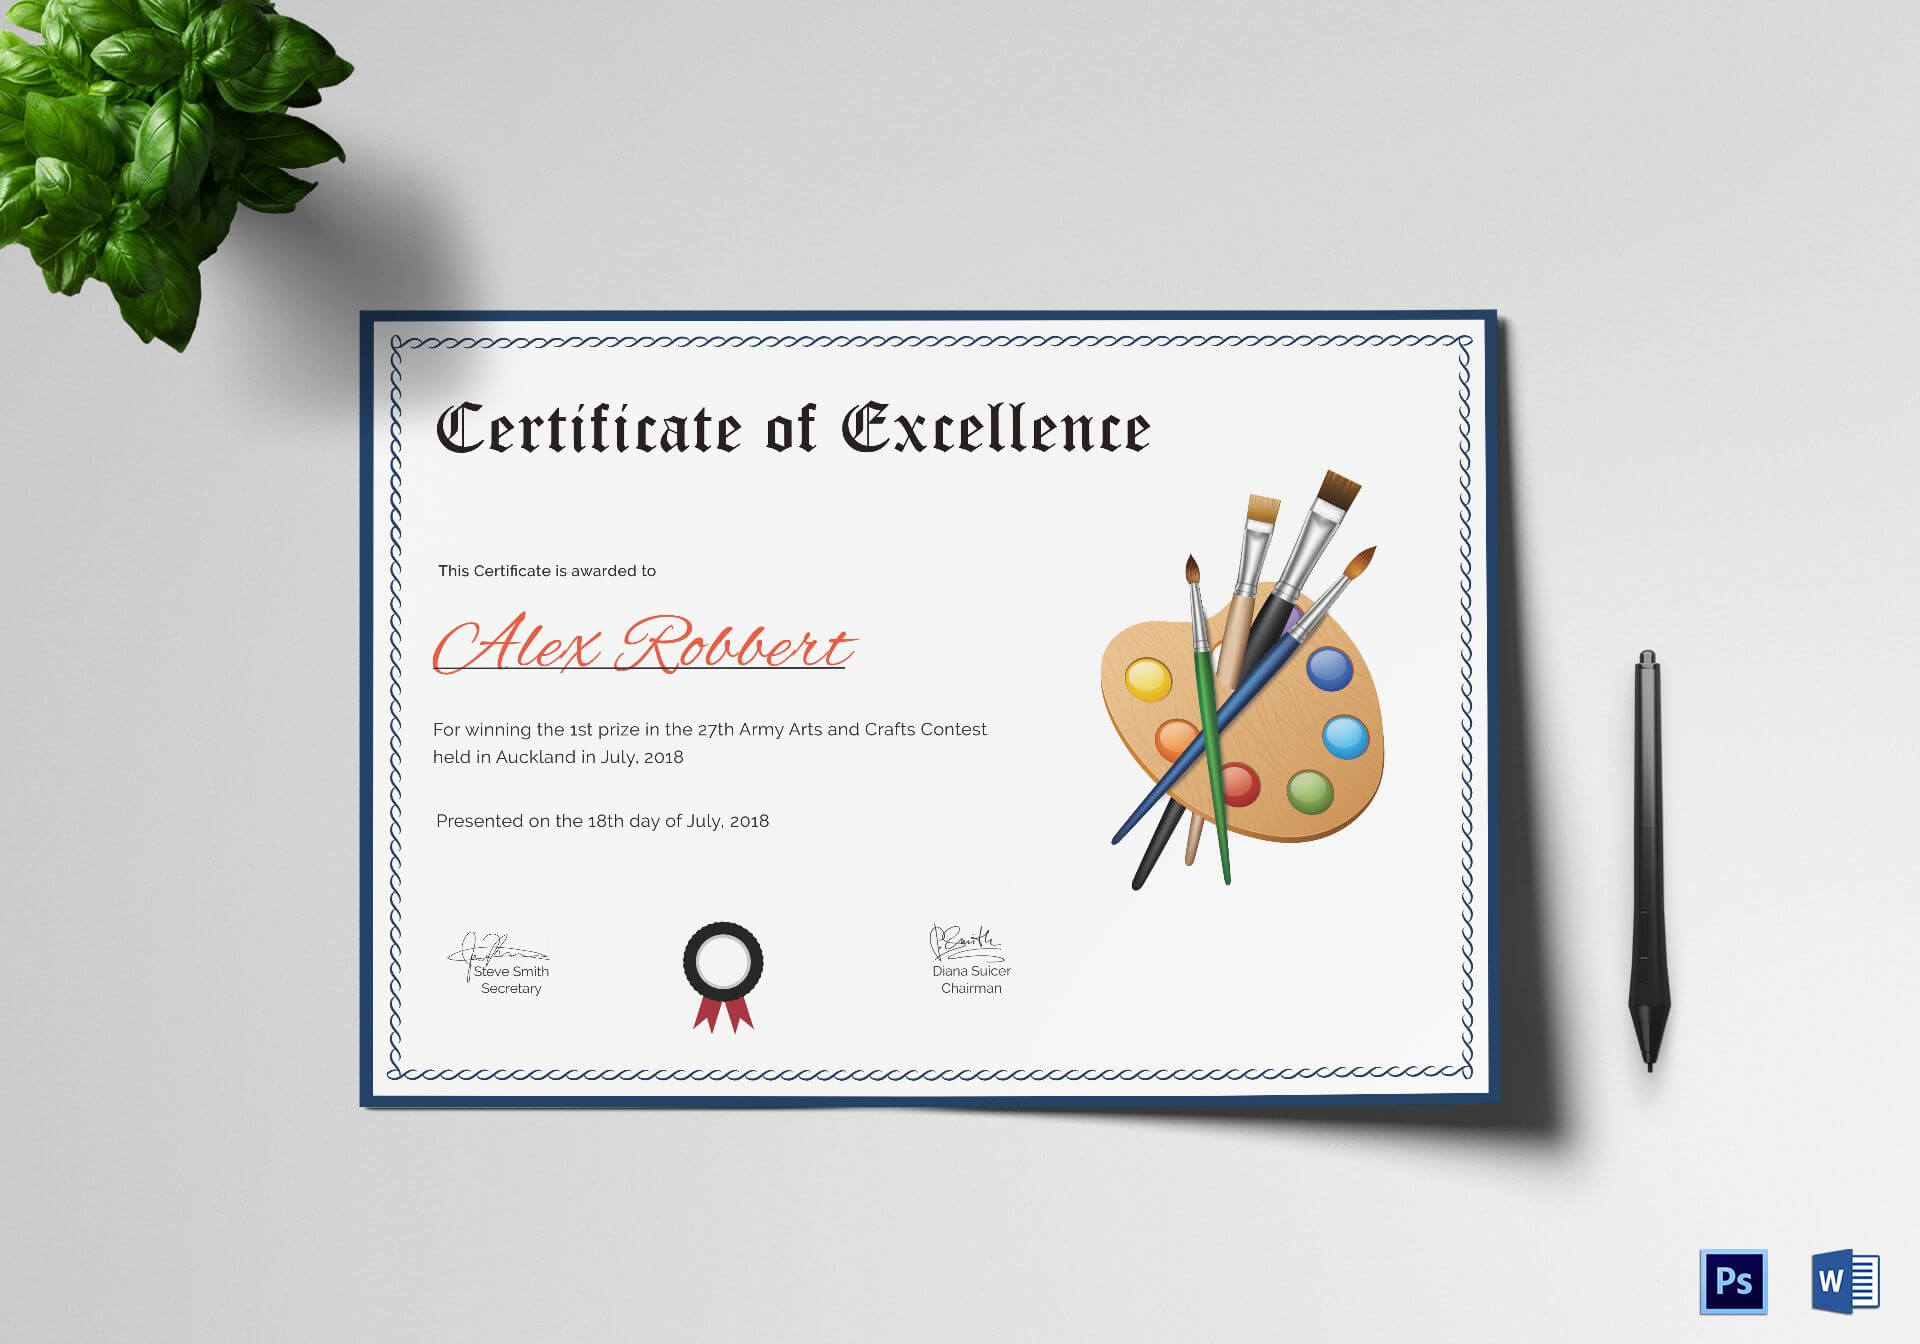 Painting Award Certificate Template | Certificate Design Throughout Award Certificate Design Template